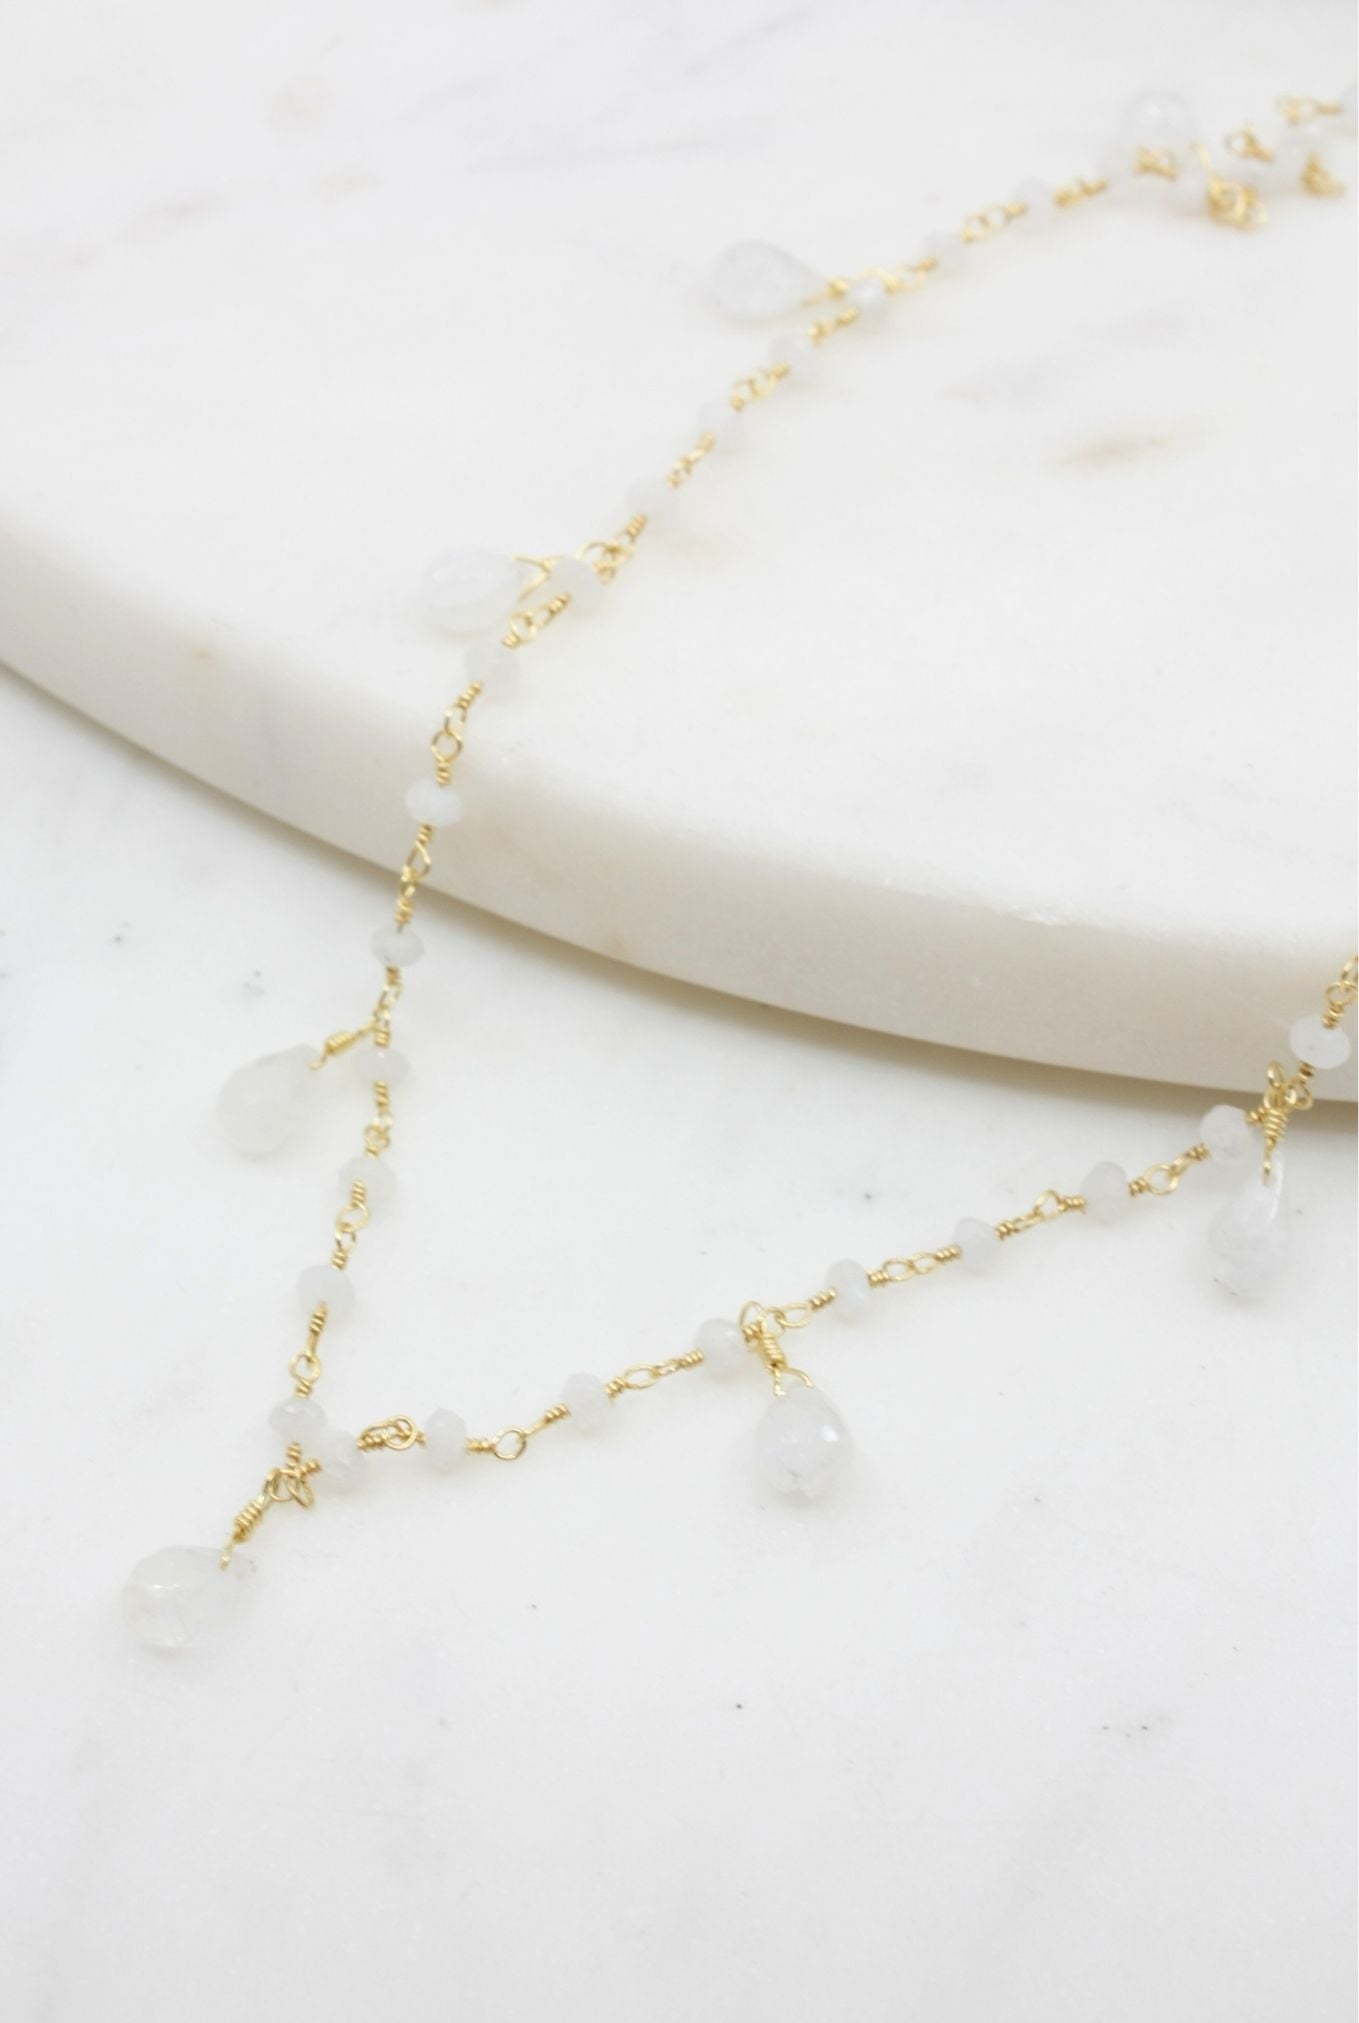 Balmy Nights Moonstone Teardrop Necklace in Gold